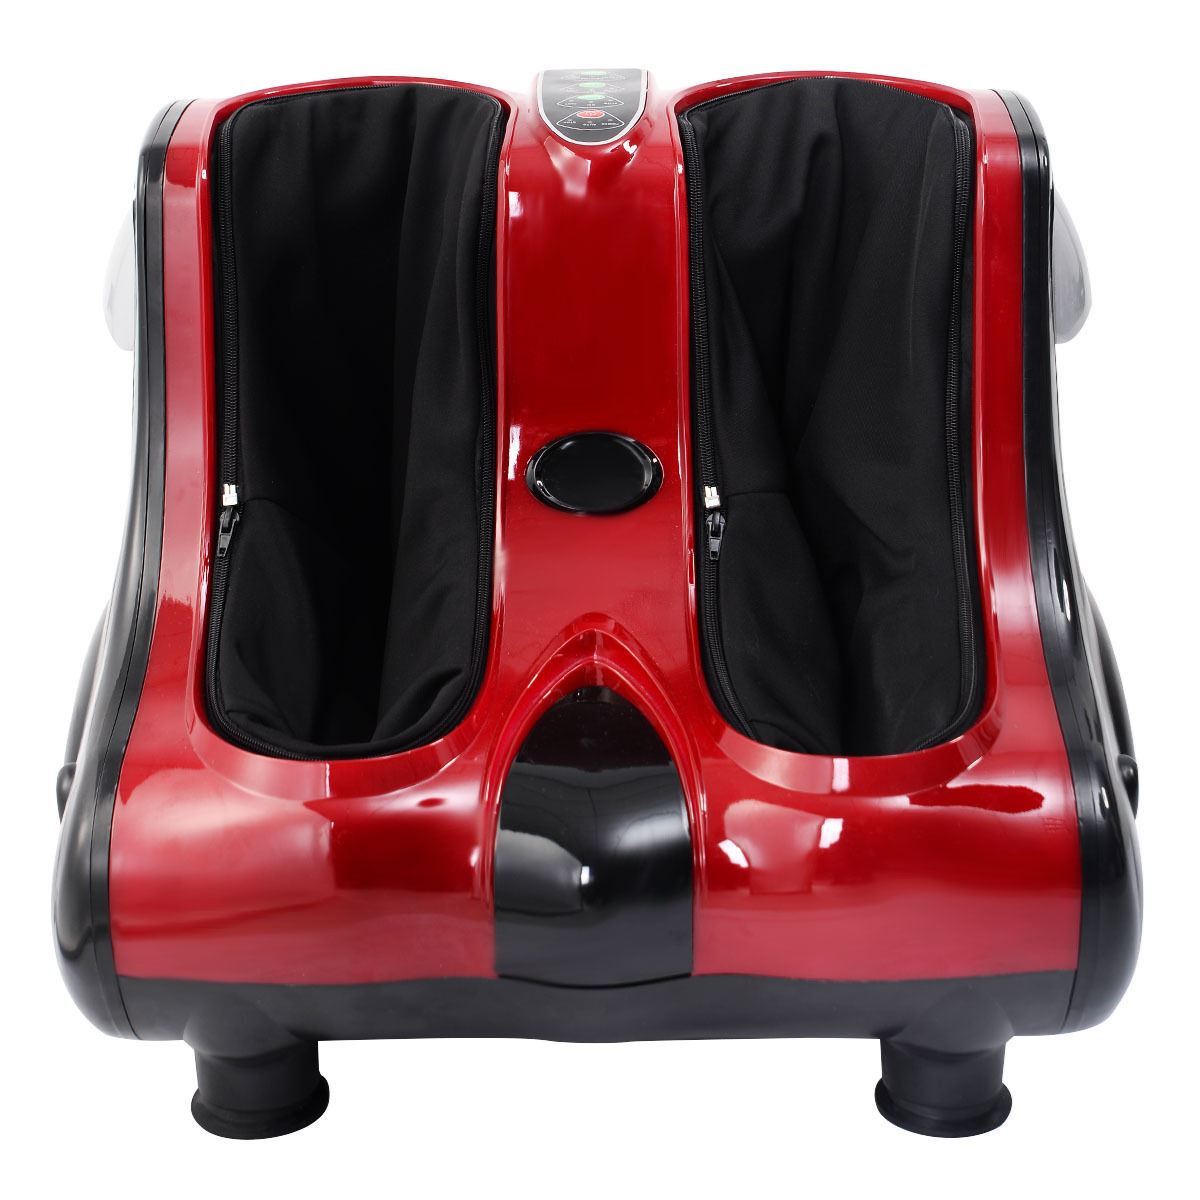 Picture of Online Gym Shop CB17020 Foot Massager Shiatsu Kneading Vibration Heating